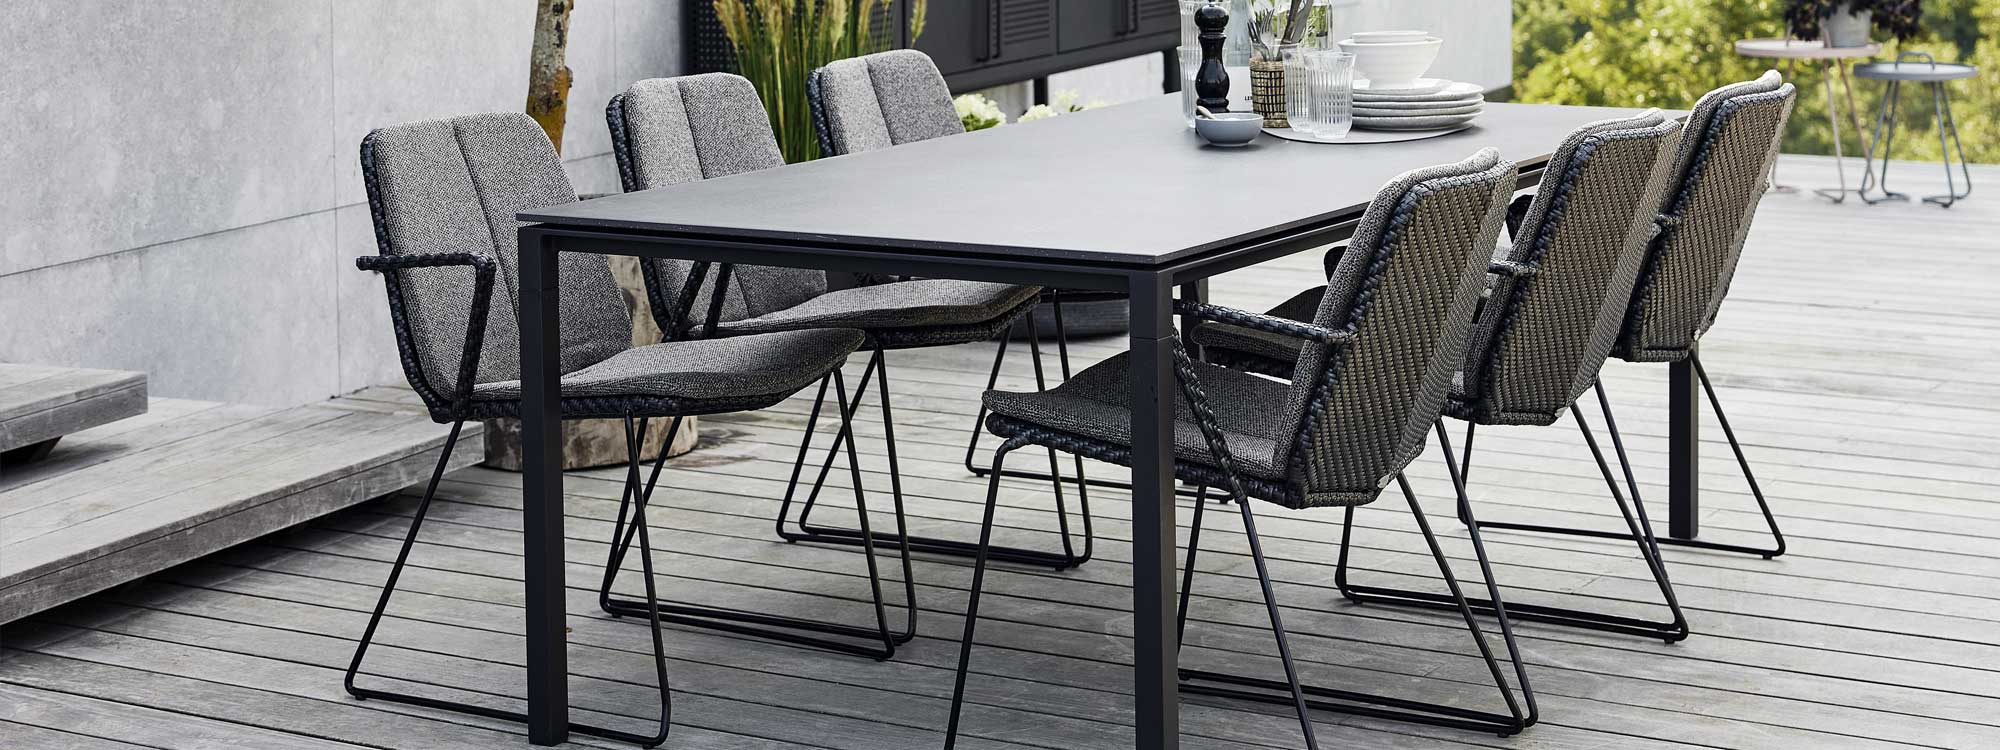 Image of Cane-line Vision dining chairs and Pure table on wooden decking